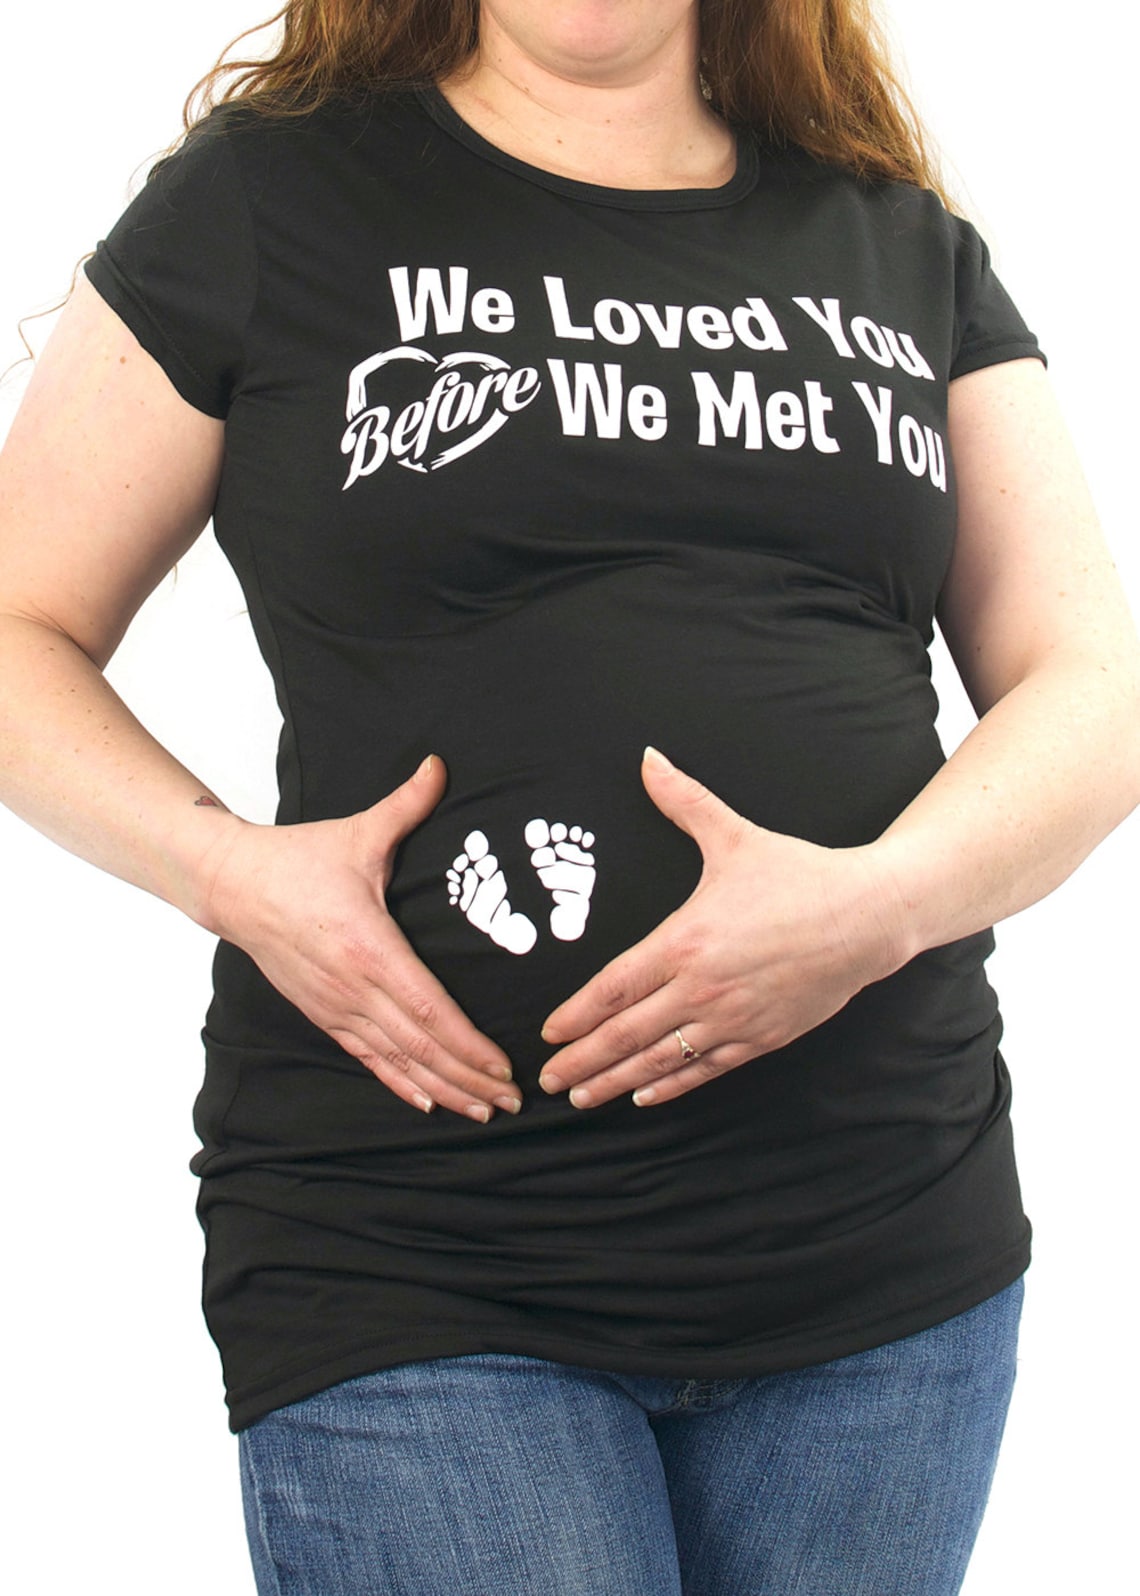 We Loved You Before We Met You Maternity T-shirt Clothes Top - Etsy